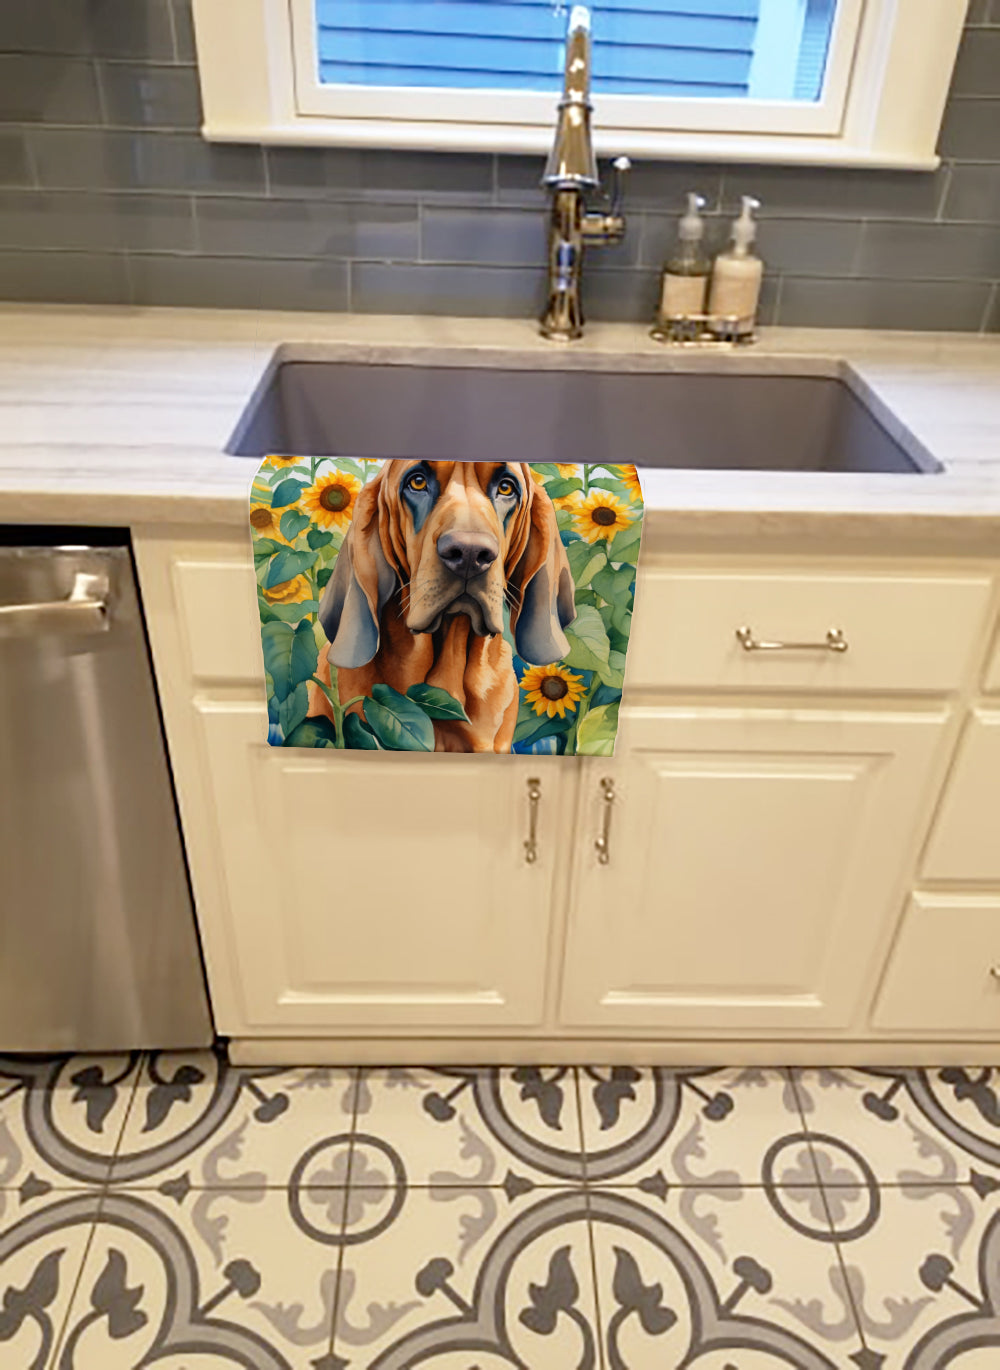 Buy this Bloodhound in Sunflowers Kitchen Towel